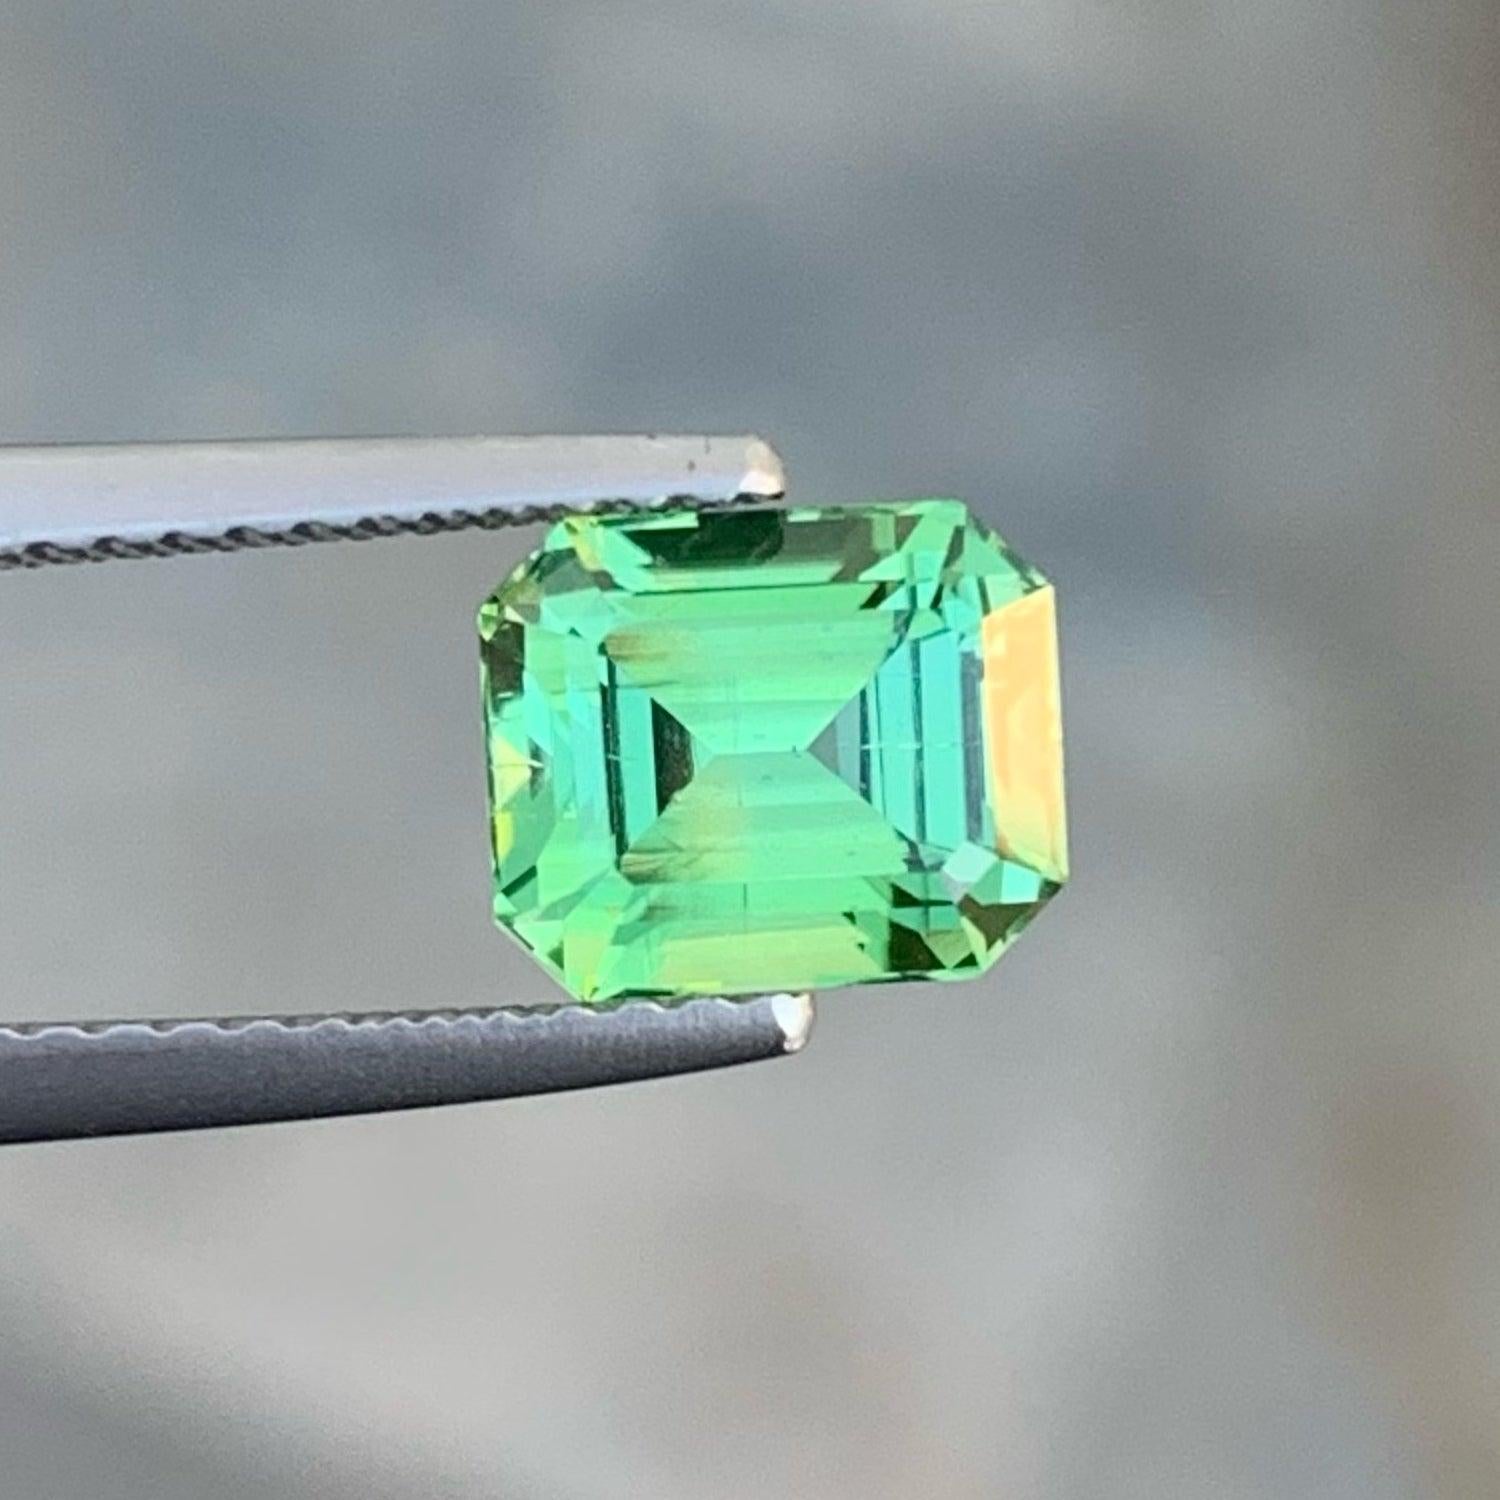 Modern Spectacular Mint Green Tourmaline 1.85 CTS Afghanistan Tourmaline Jewelry For Sale